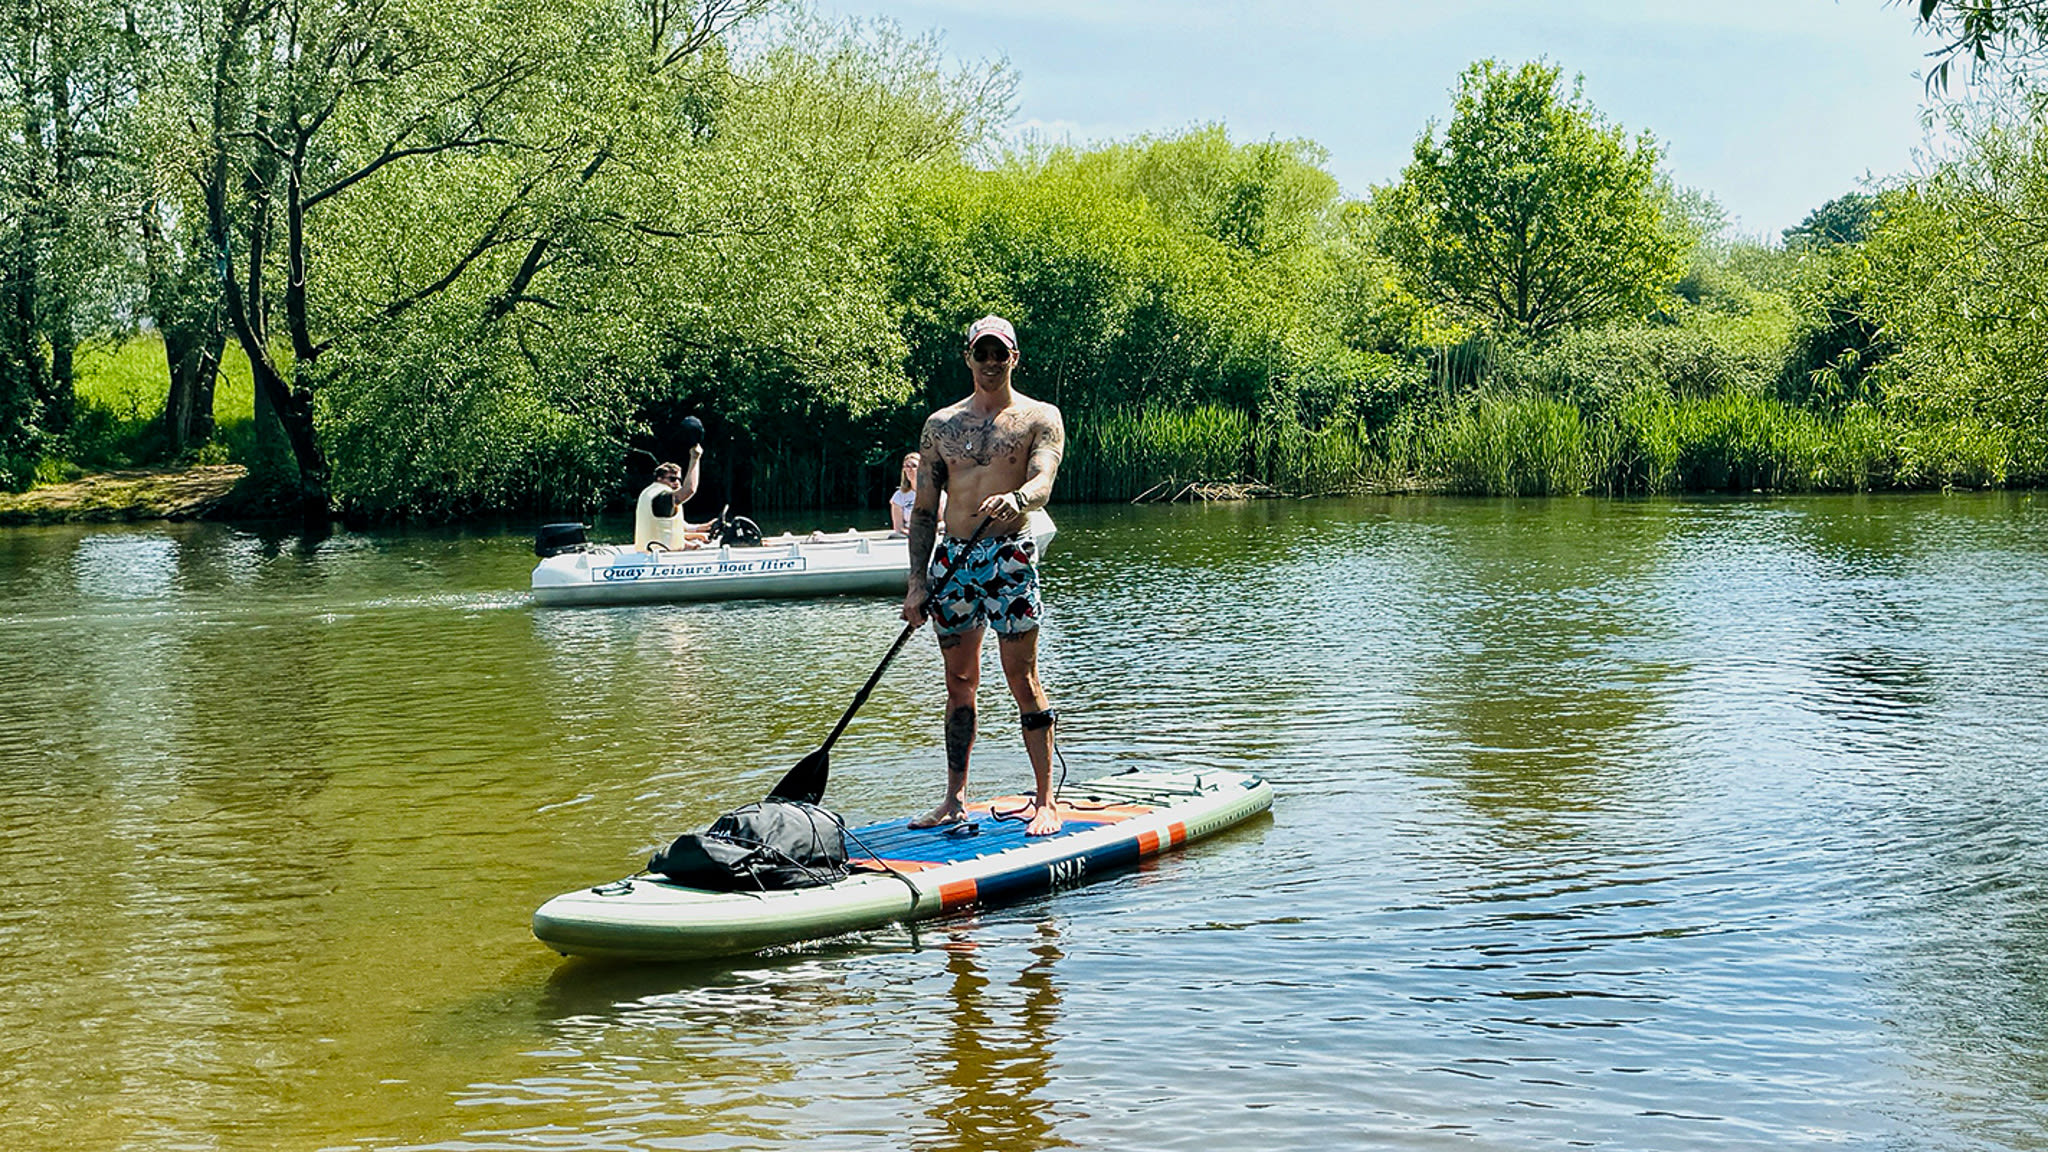 Isle Switch Pro inflatable stand-up paddle board review: beautifully made and very versatile